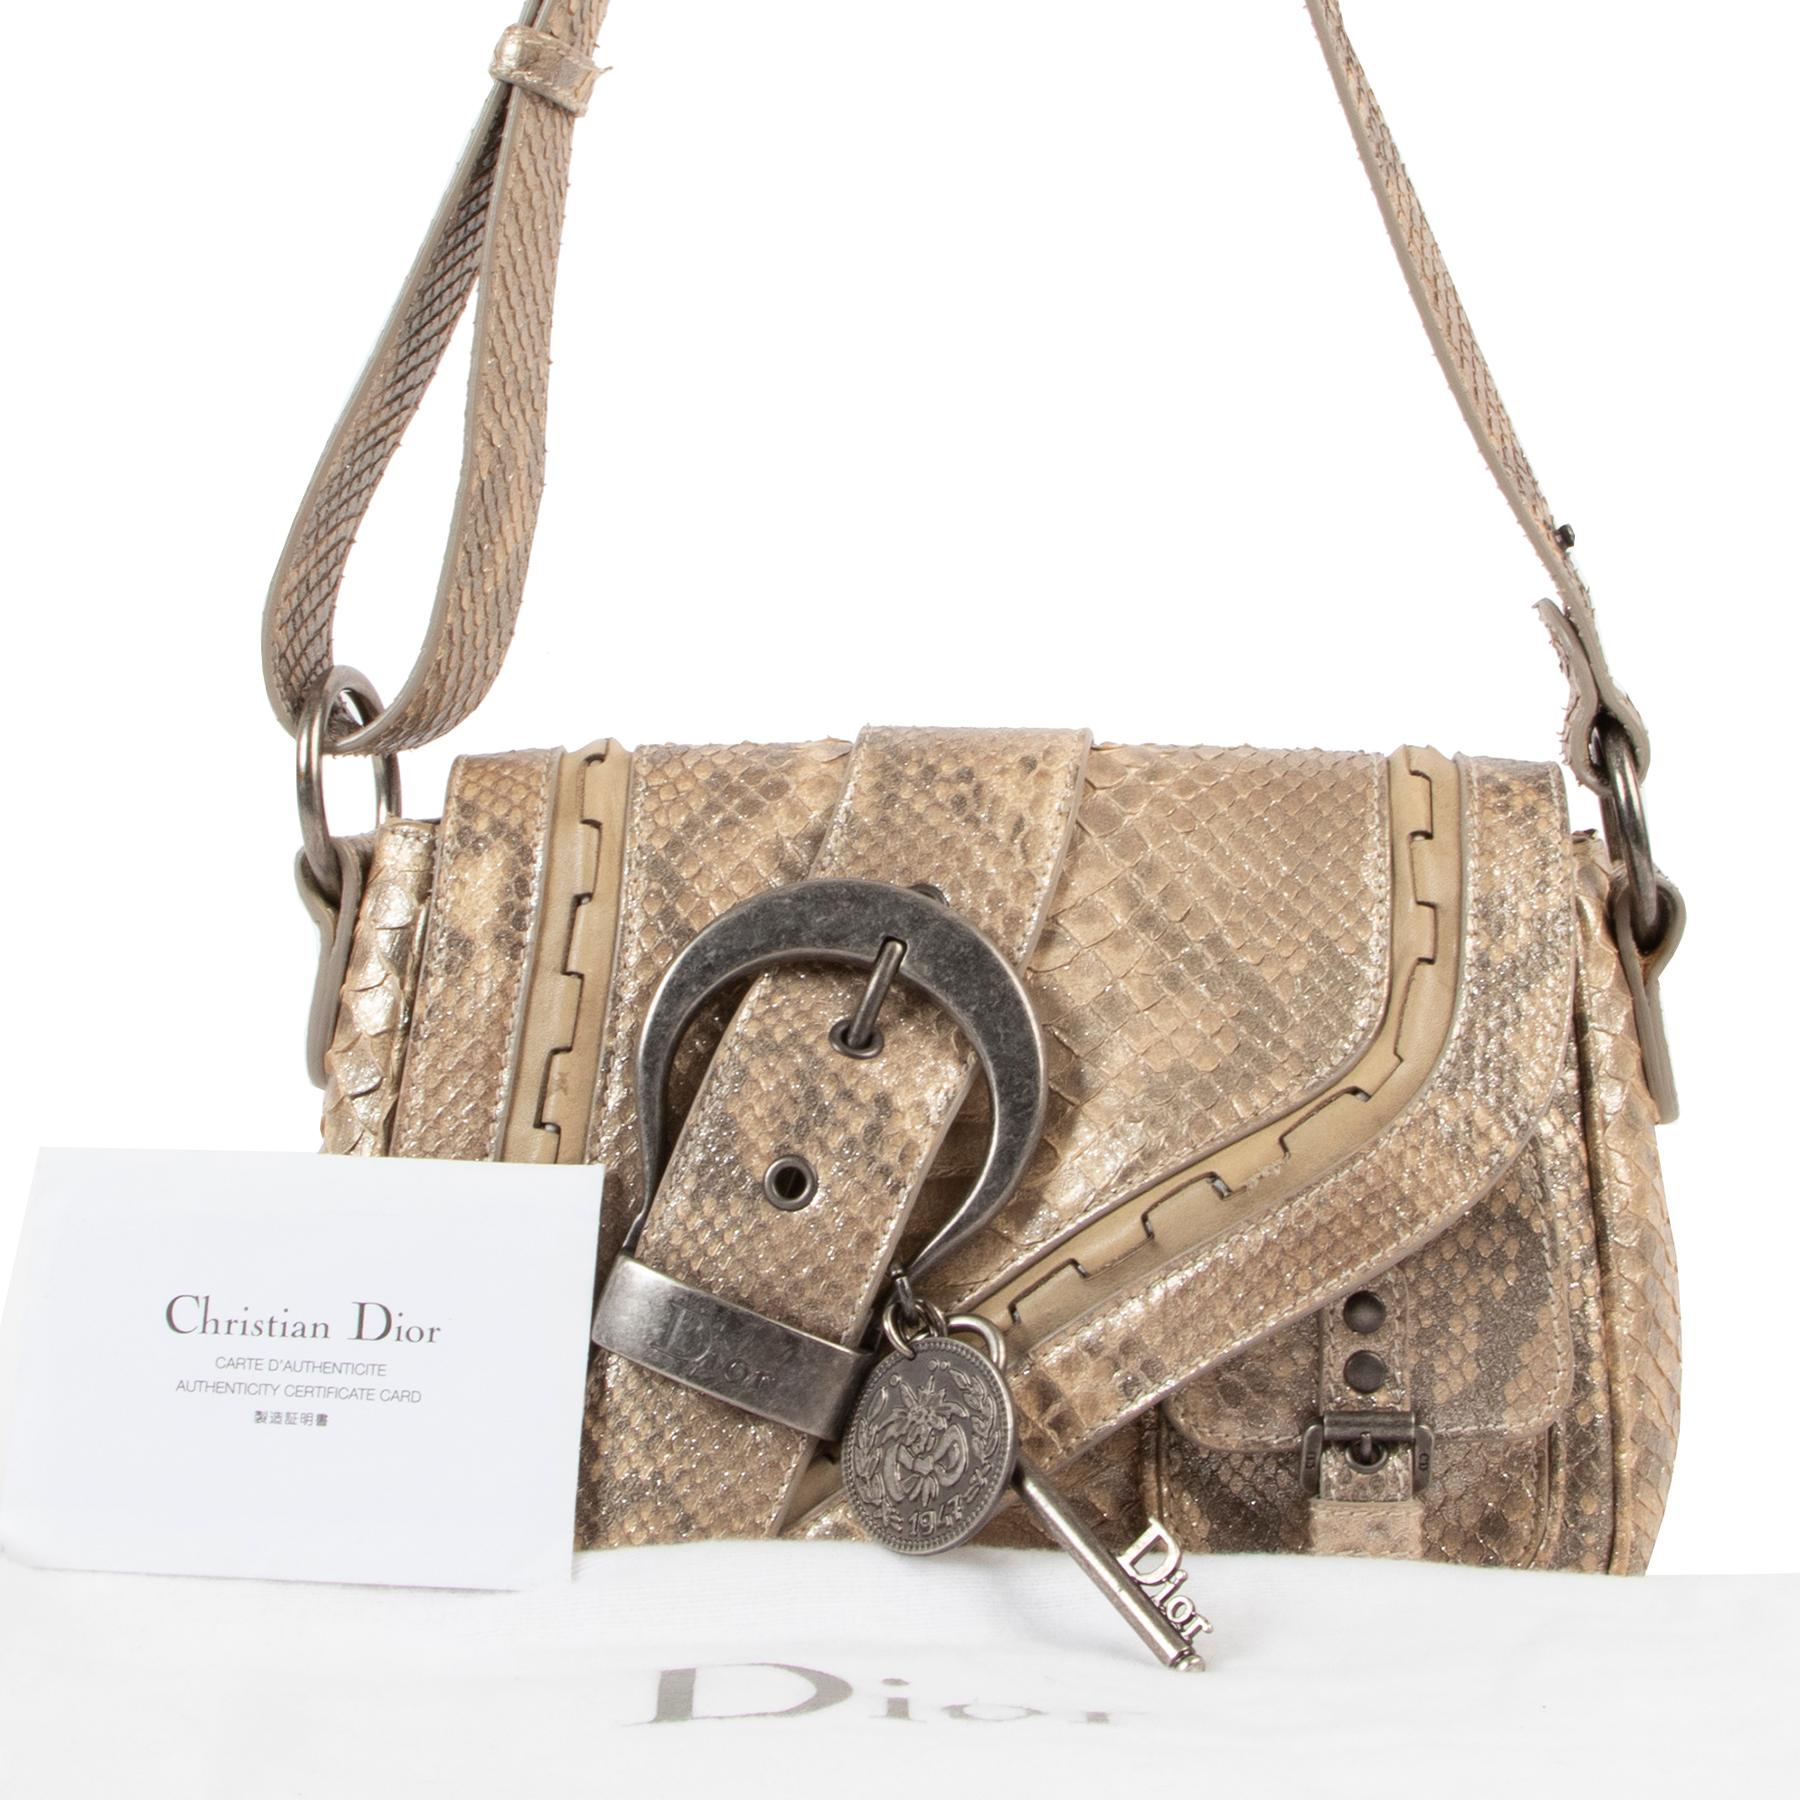 Christian Dior Mini Gaucho Saddle Limited Edition Glittering Python

This Christian Dior Glittering Python Mini Gaucho Bag is one of the most popular style created by John Galliano. It features gorgeous glittering 